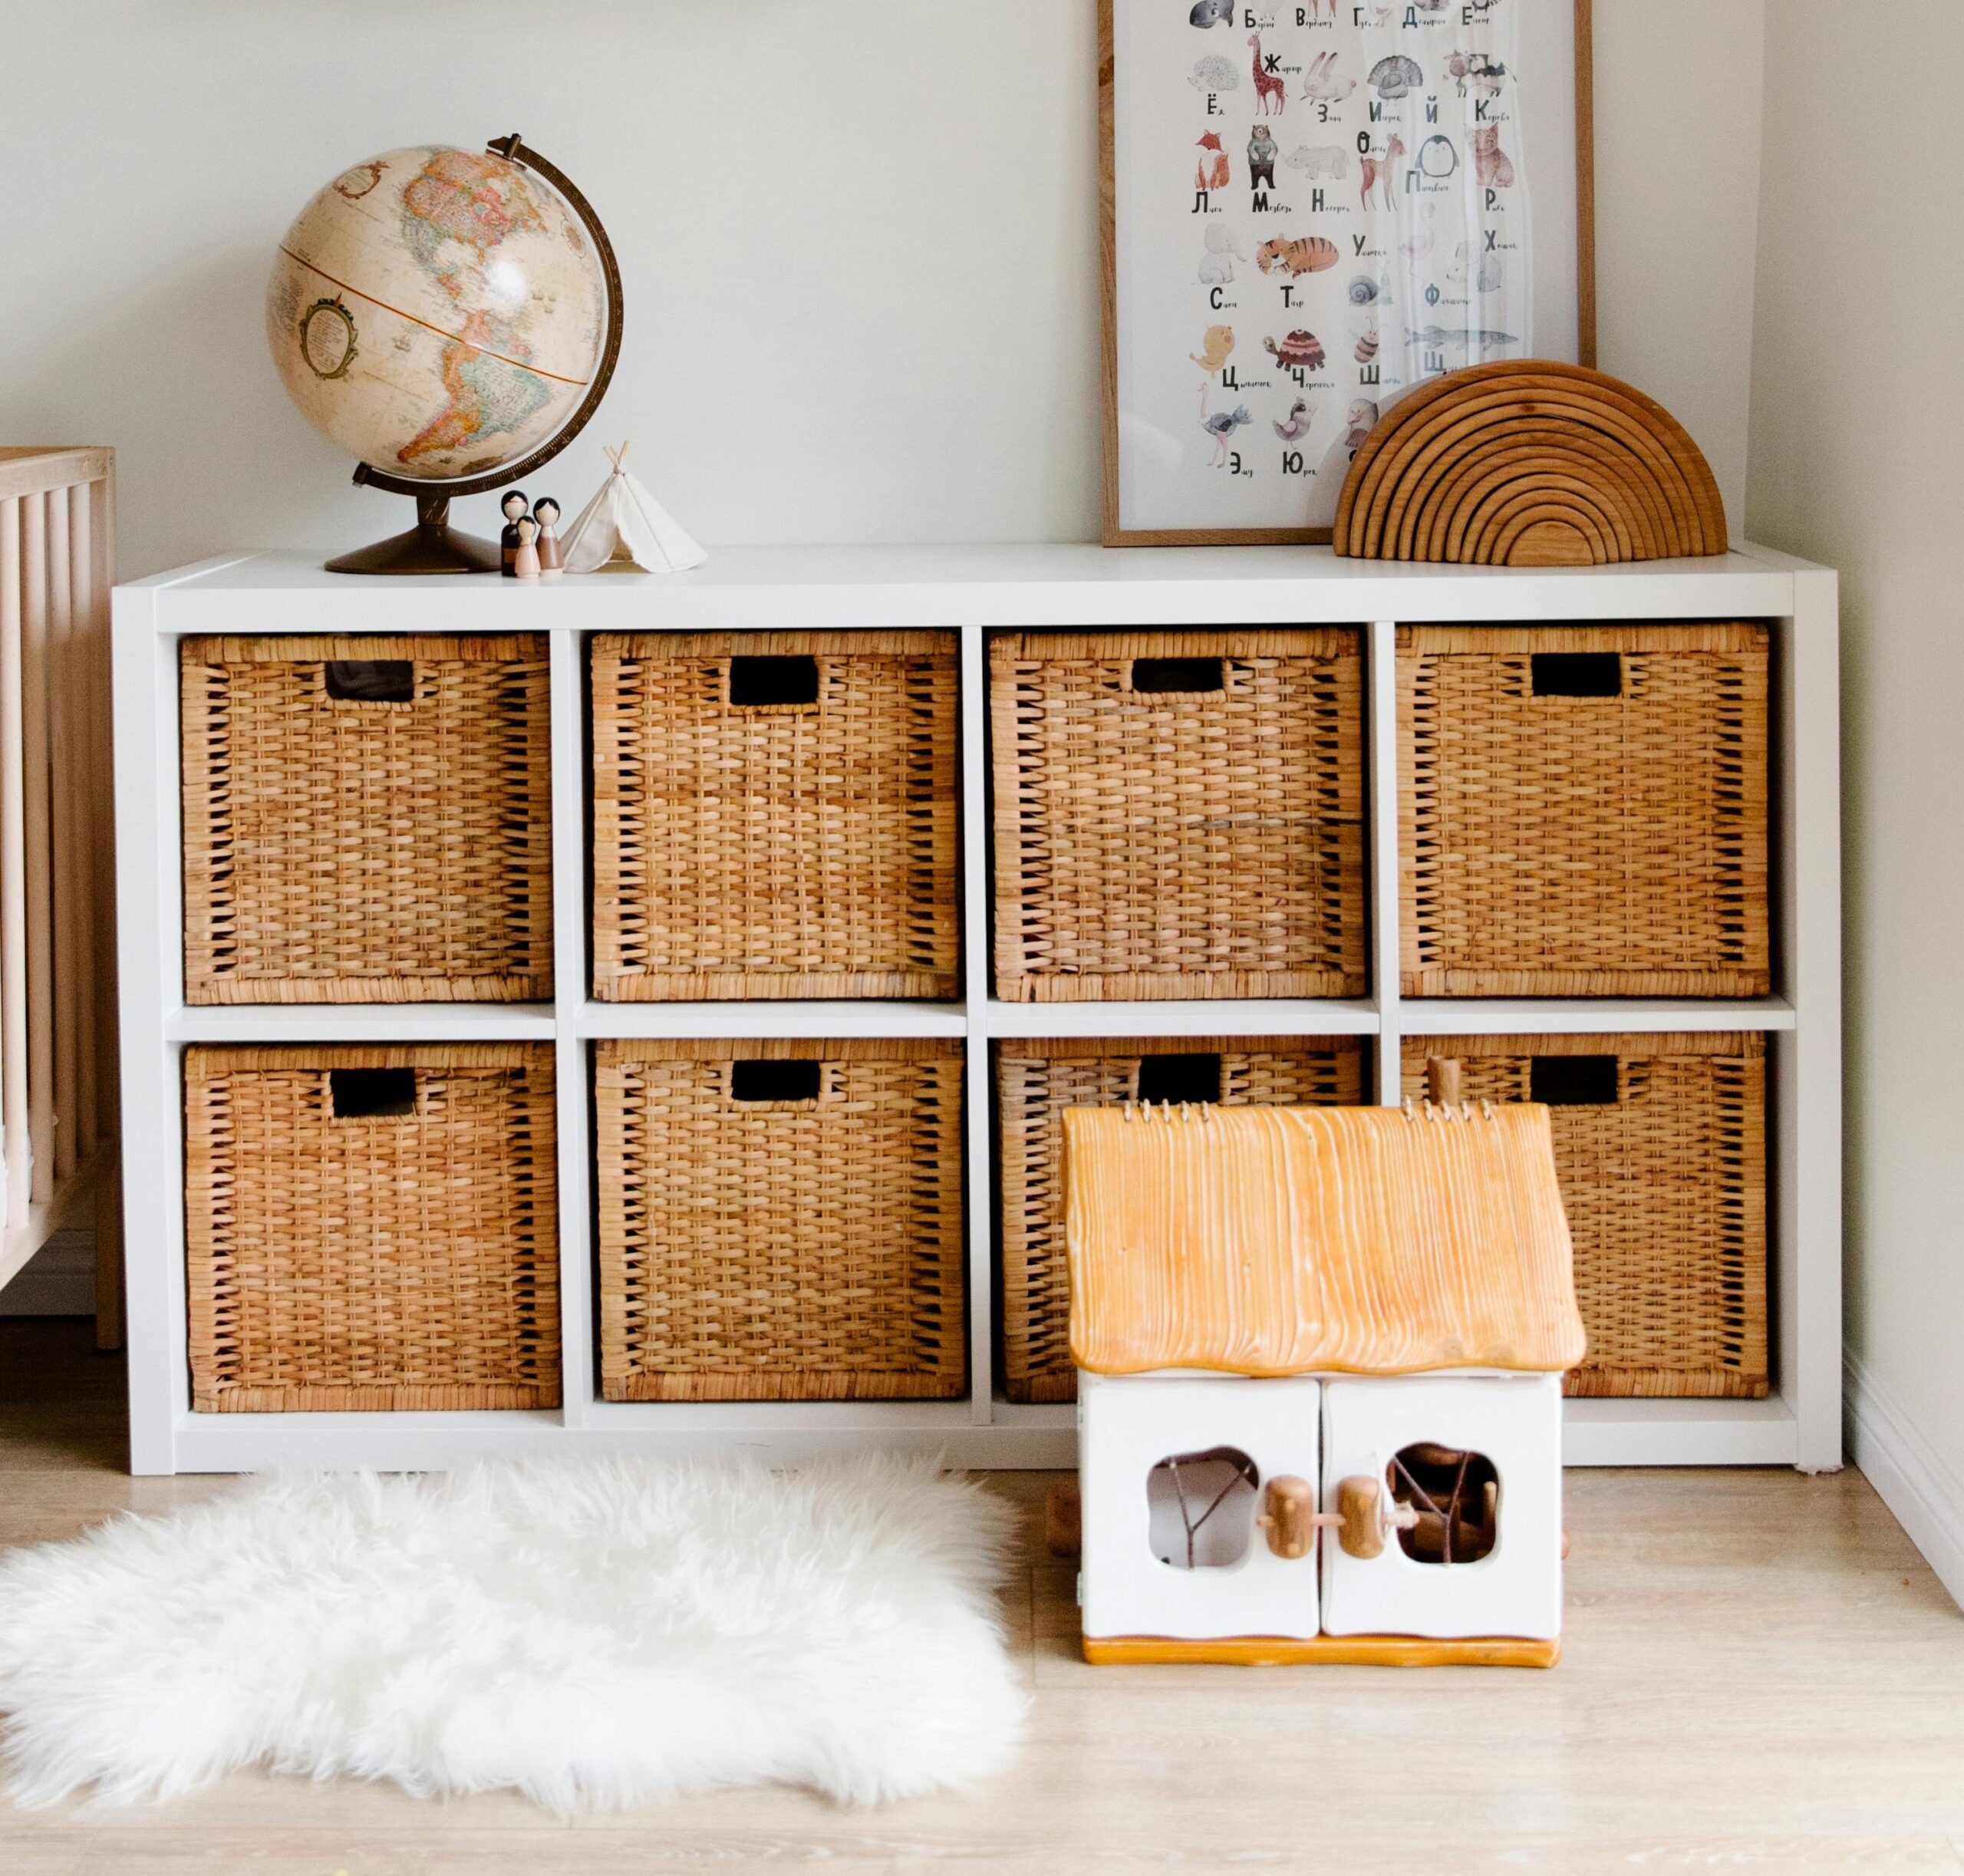 White shelf with woven storage boxes inside and a globe on top.